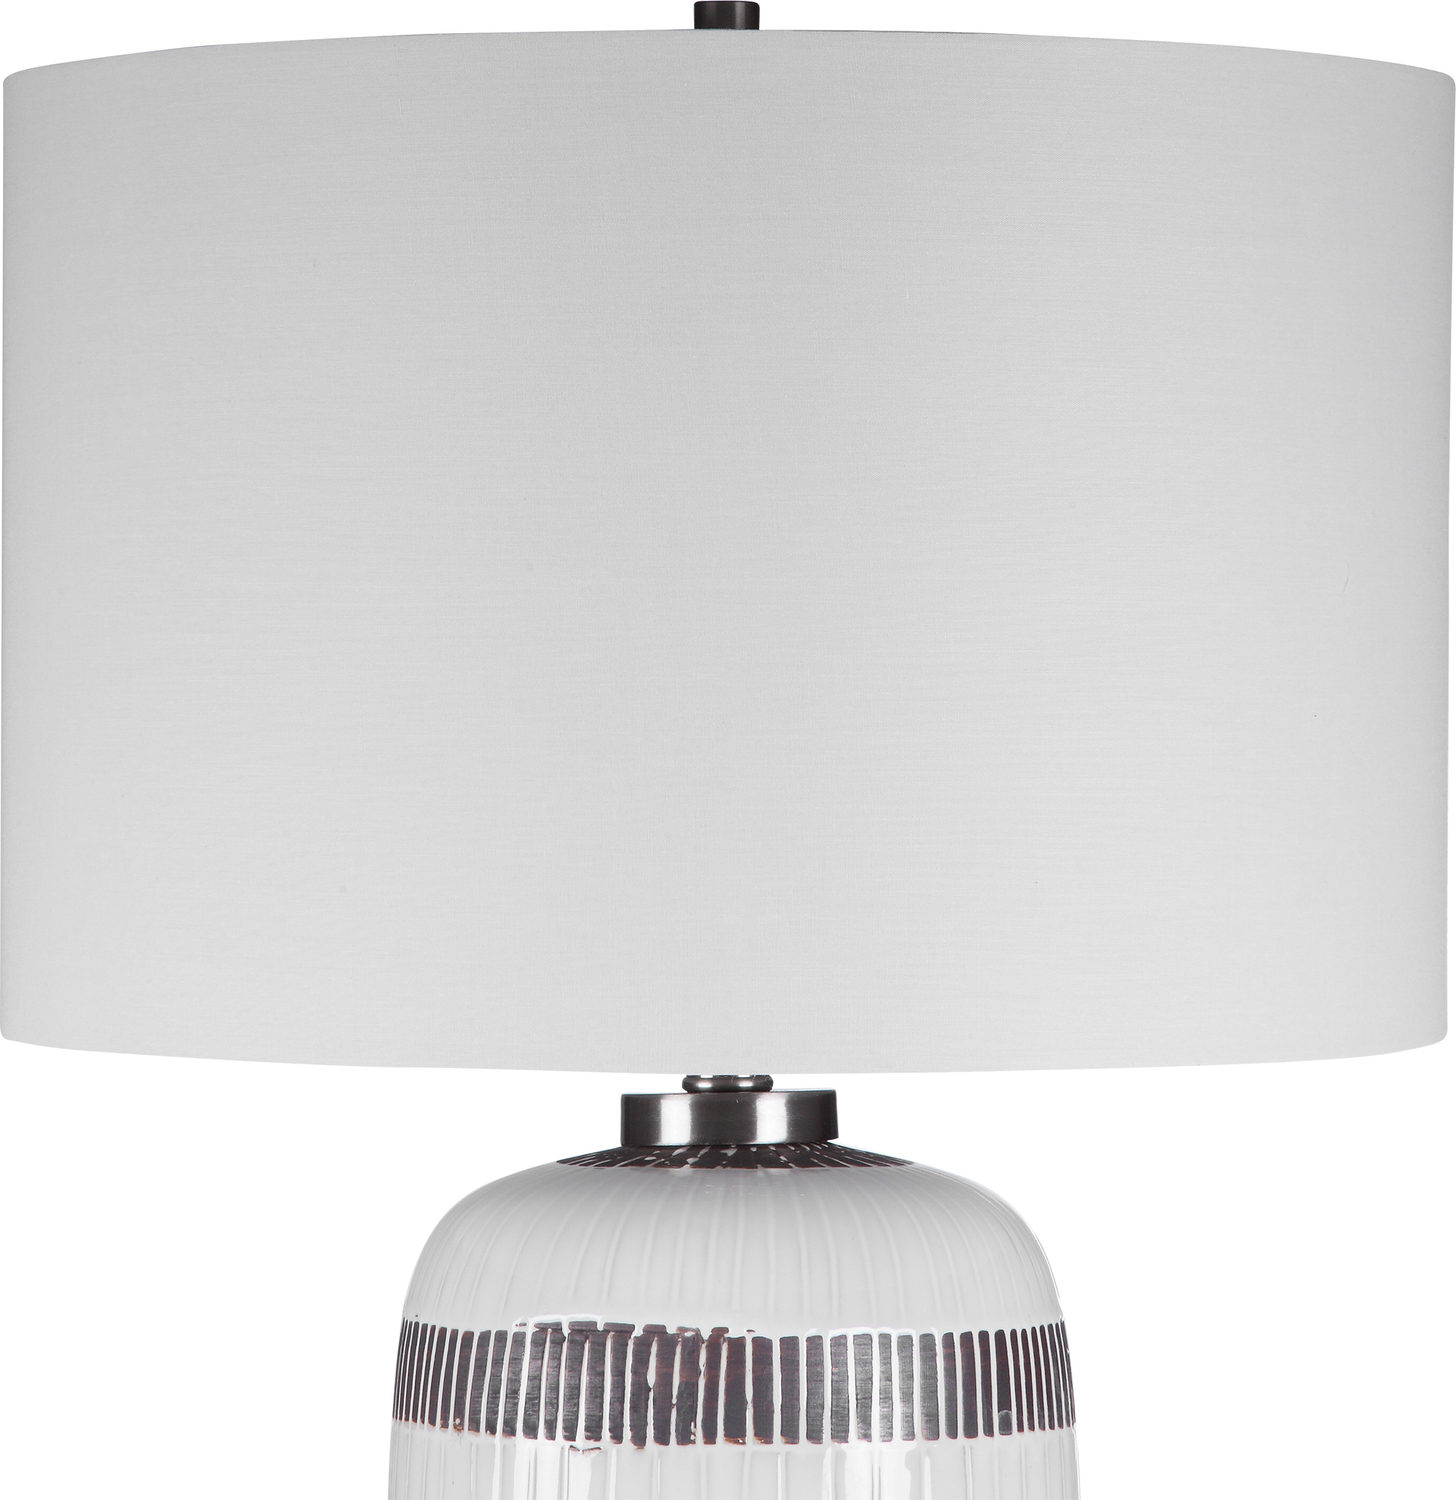 Uttermost Striped Table Lamp Table Lamps Add A Touch Of Lodge Style To Your Space With This Ceramic Table Lamp. The Base Features Vertical Embossed Texture Finished In An Aged White Glaze With Dark, Chocolate Brown Details, Accented With Brushed Nickel Details.